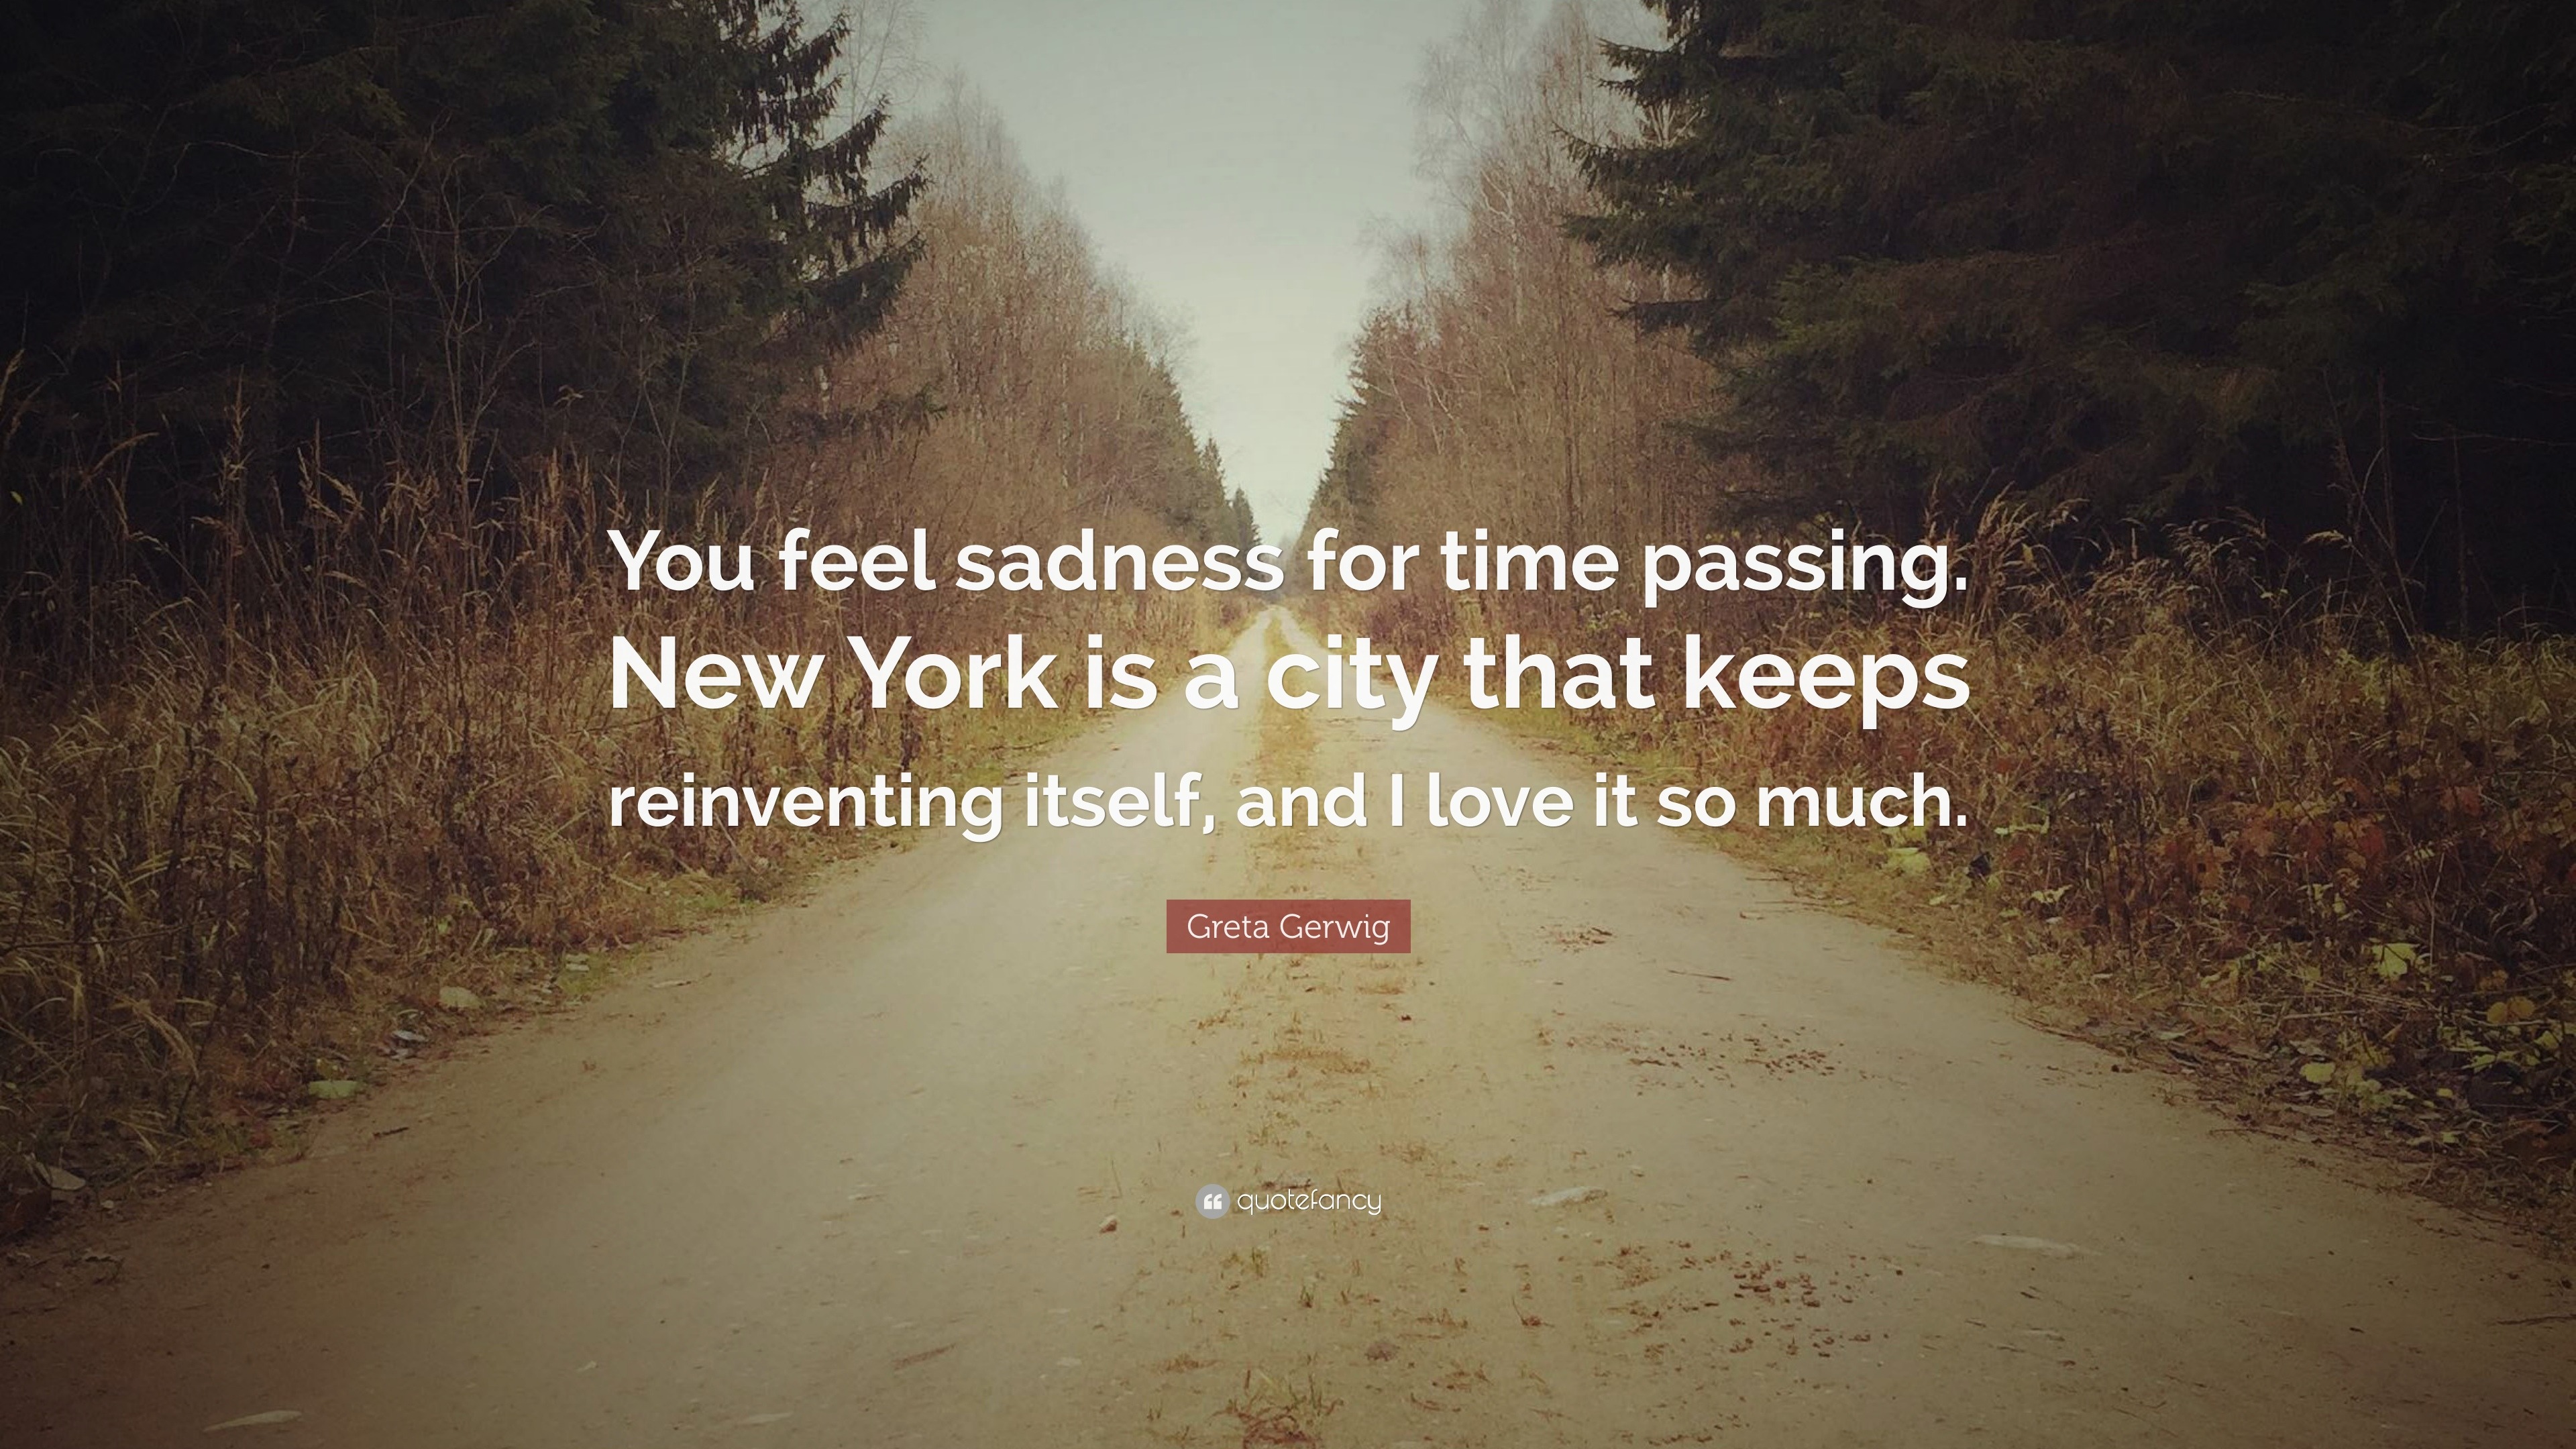 Greta Gerwig Quote “You feel sadness for time passing New York is a